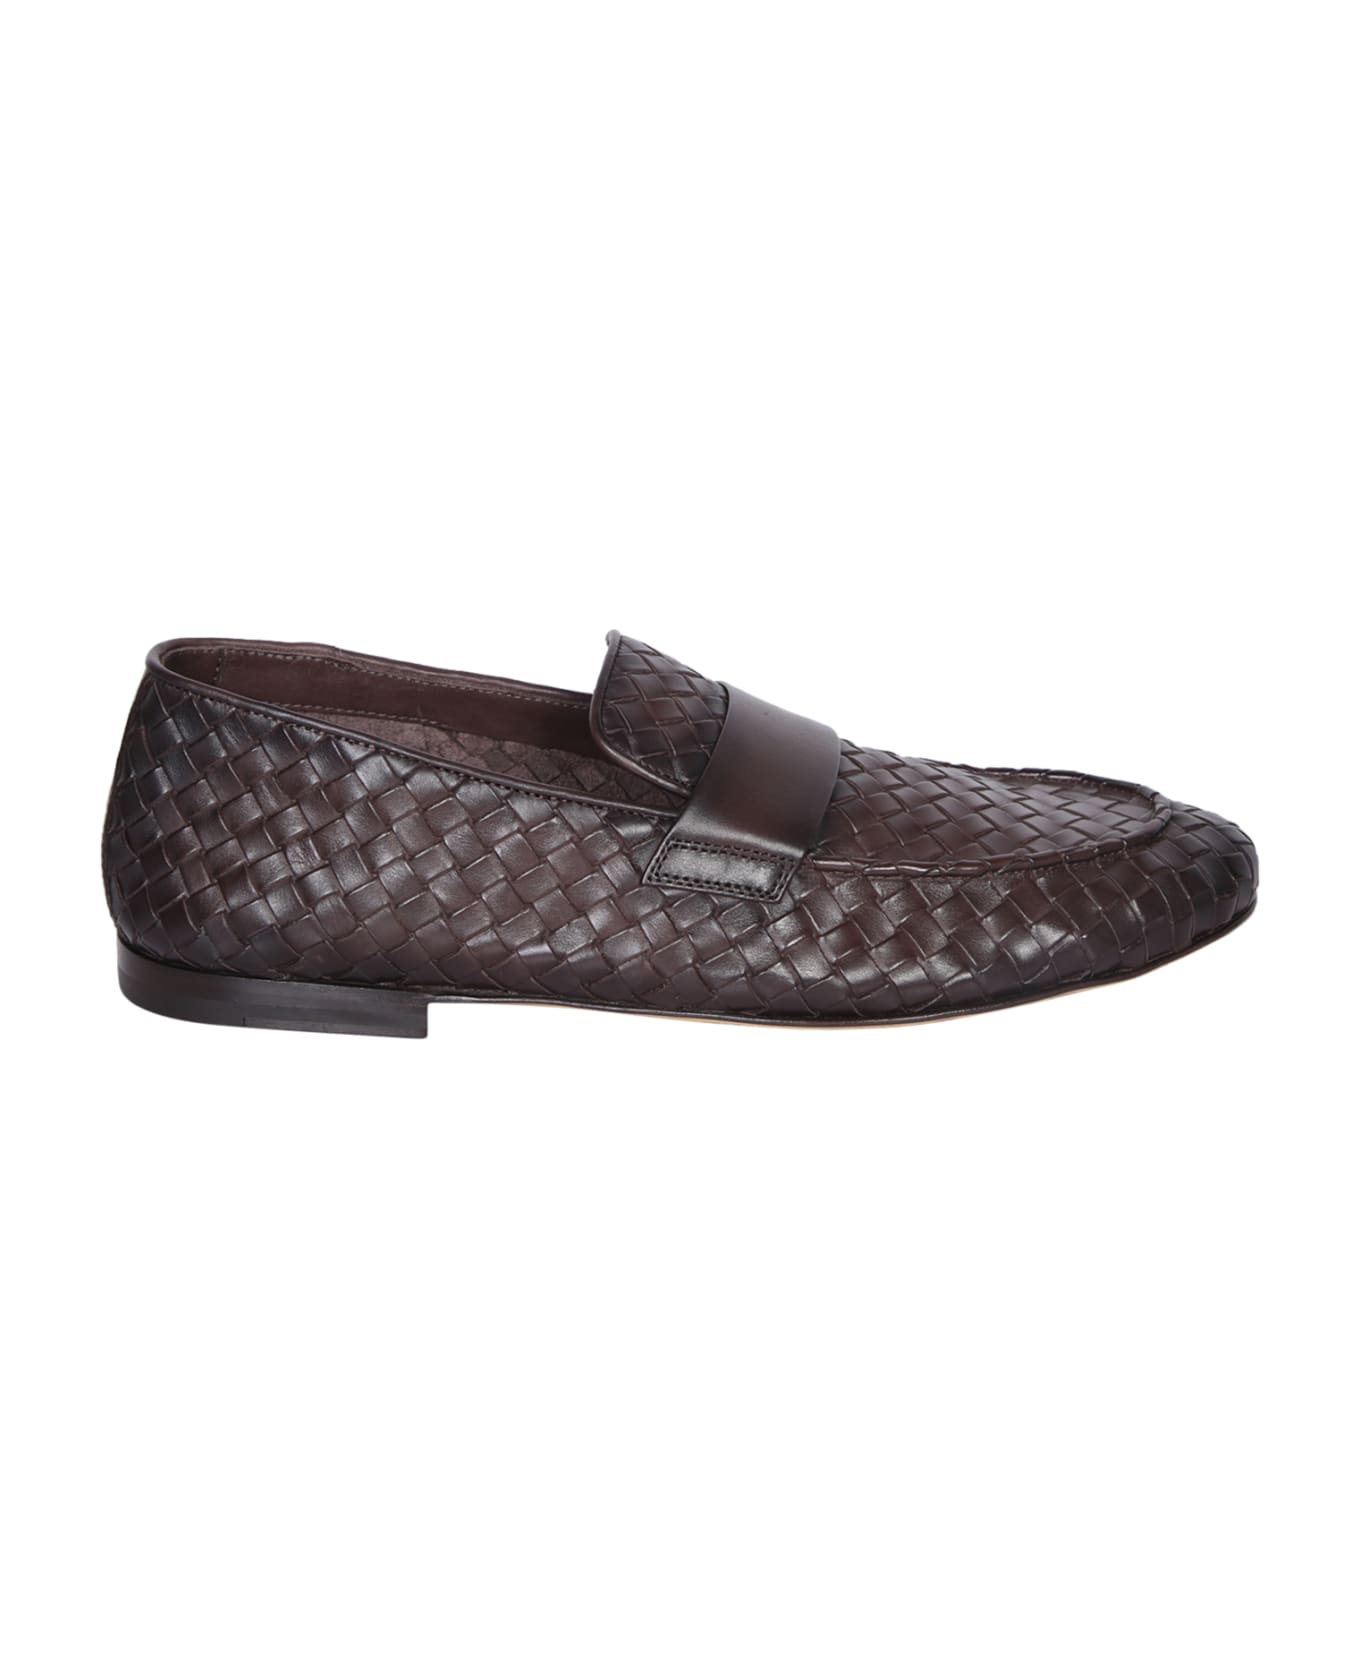 Officine Creative Airto 011 Braided Brown Loafer - Brown ローファー＆デッキシューズ